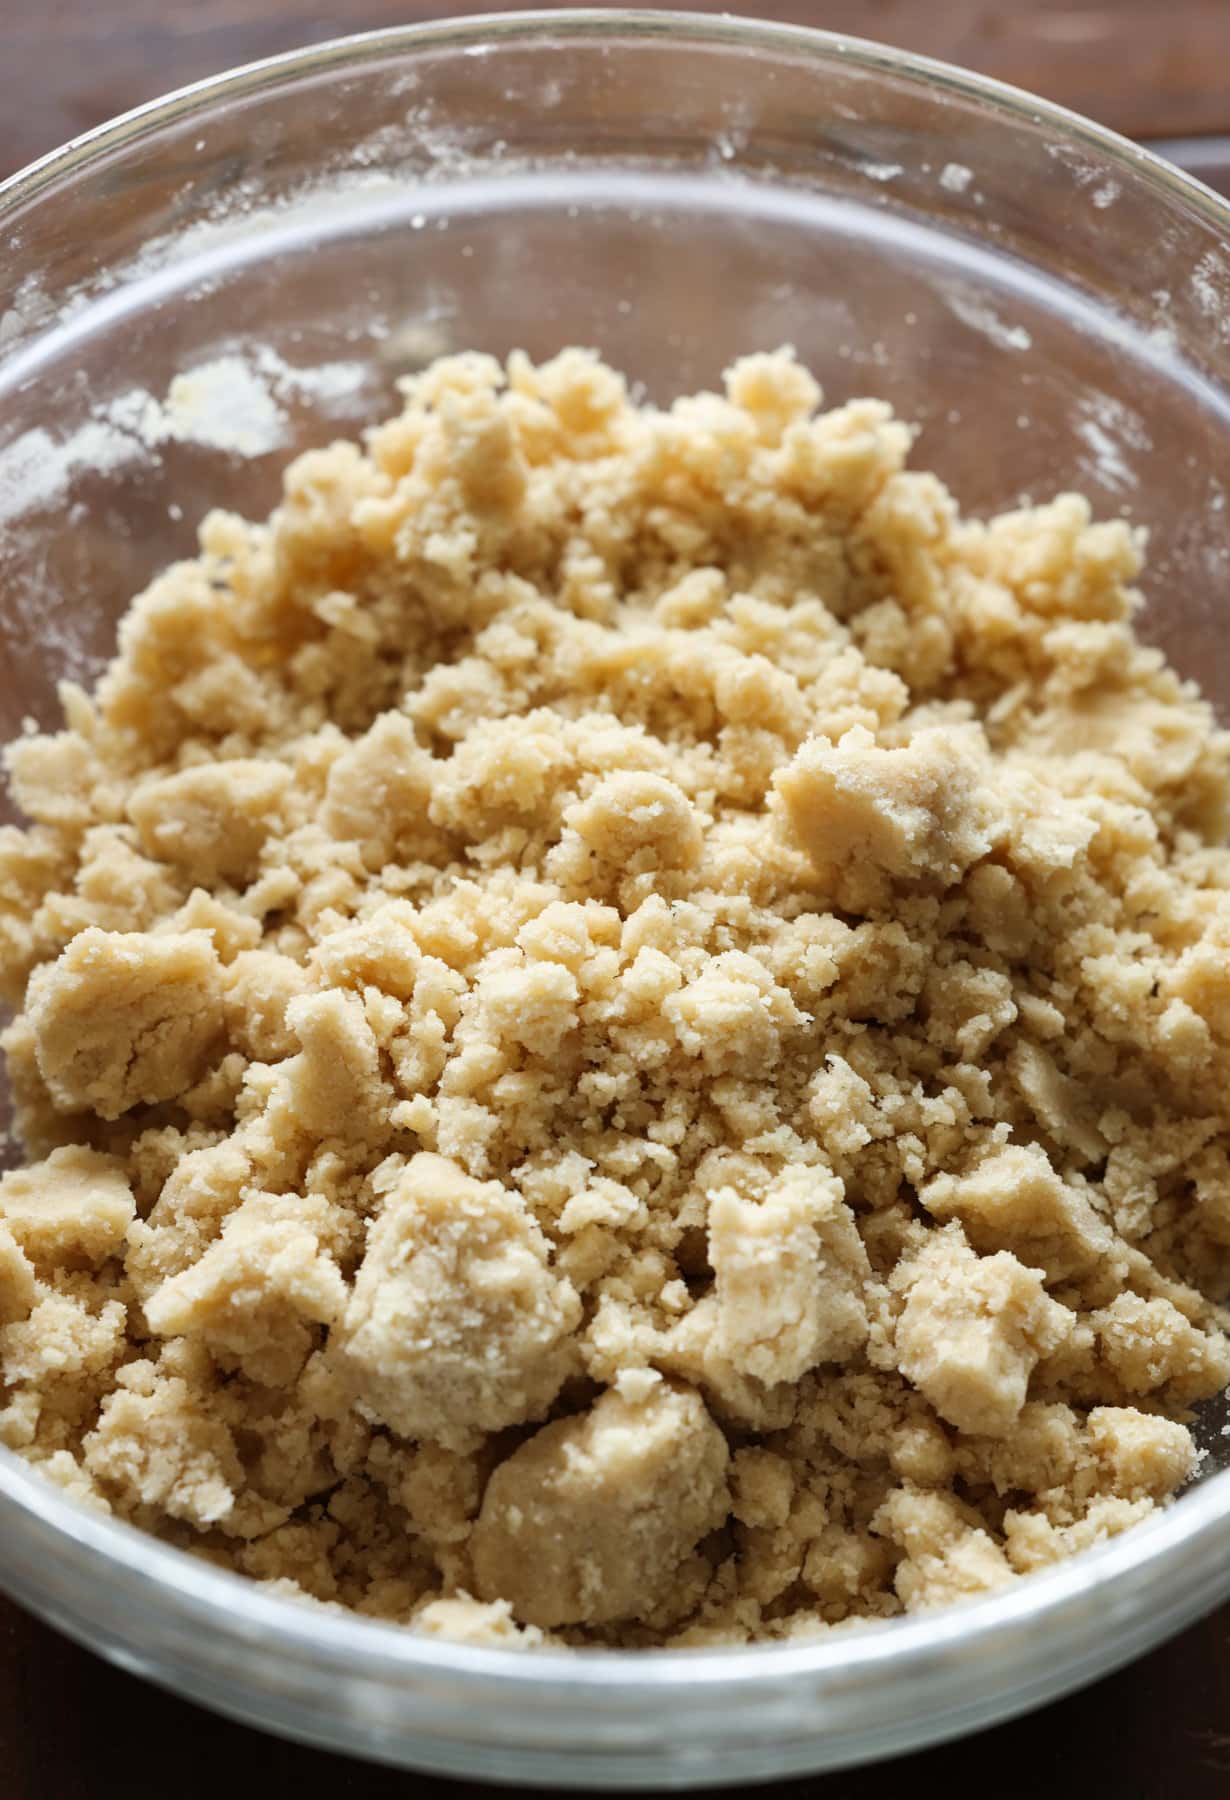 unbaked streusel topping in a bowl